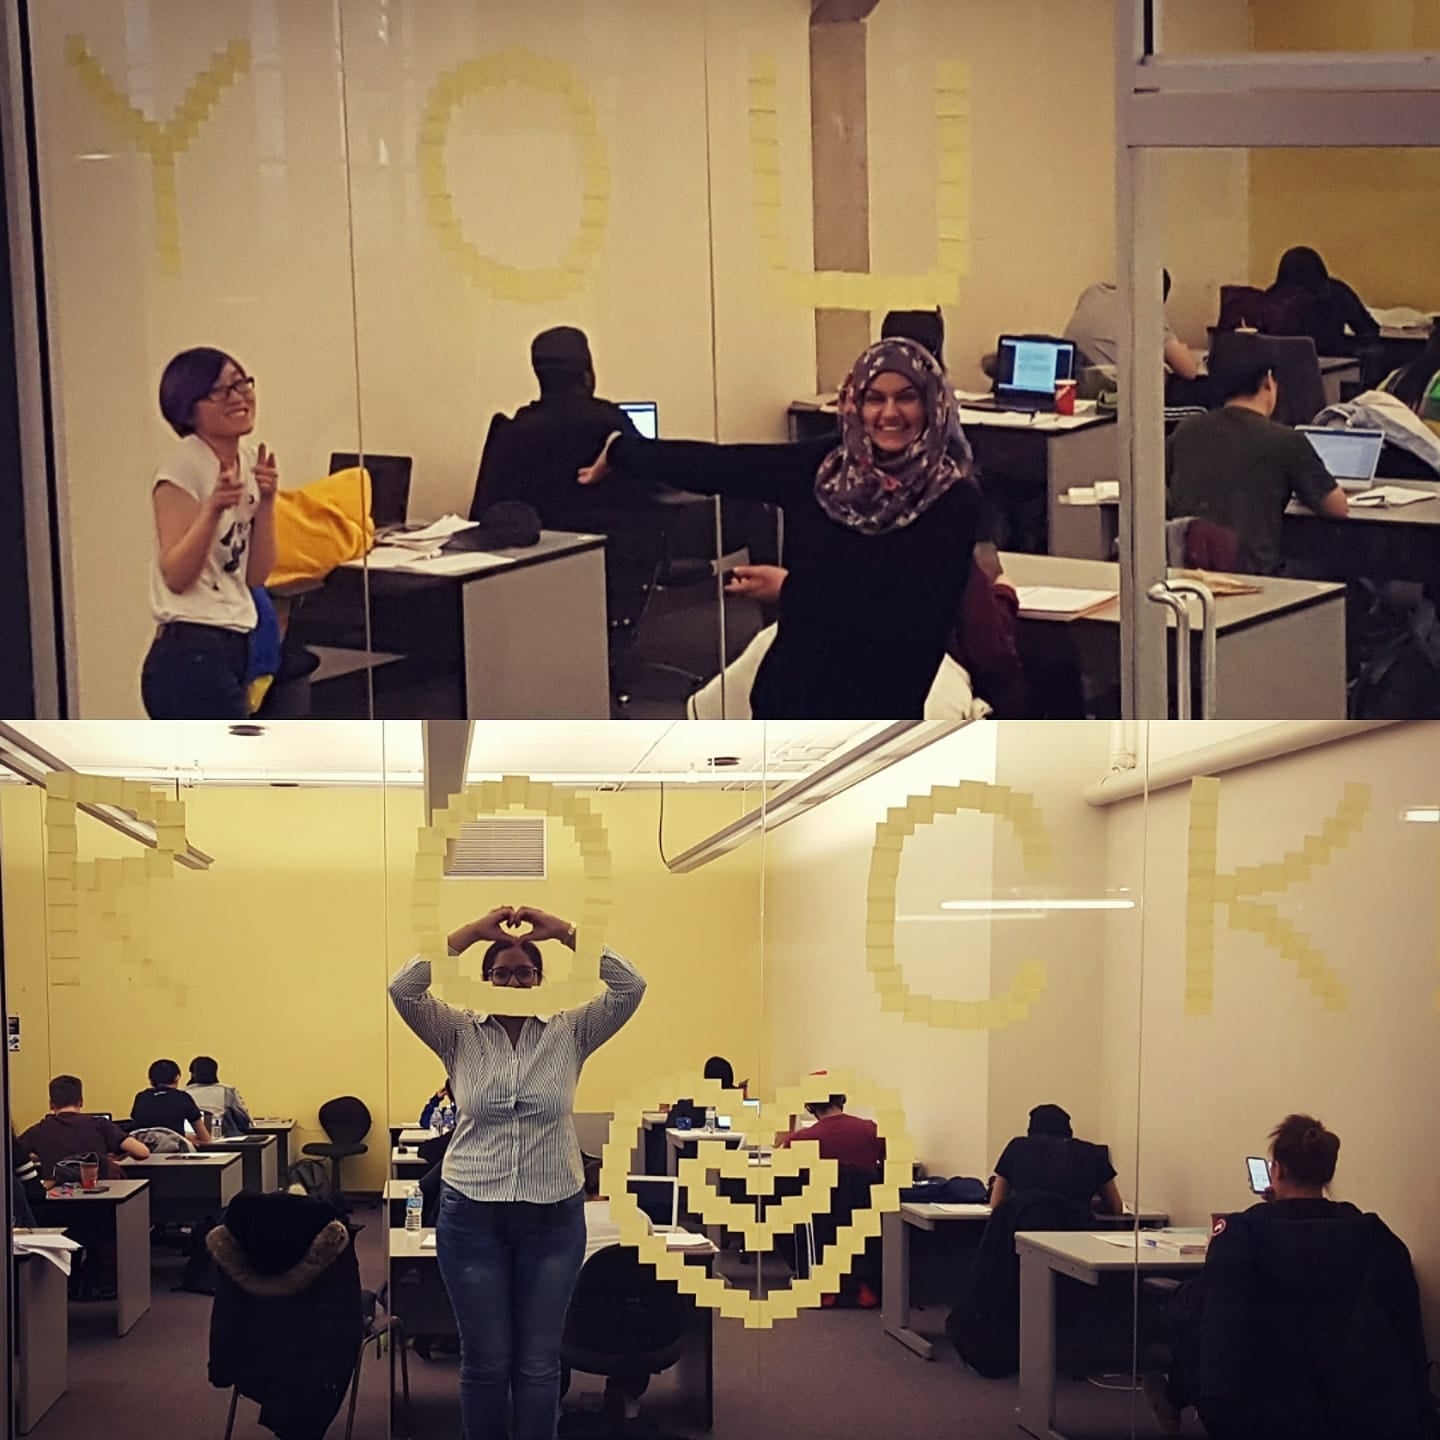 students spelling out 'you rock' in sticky notes on a glass wall